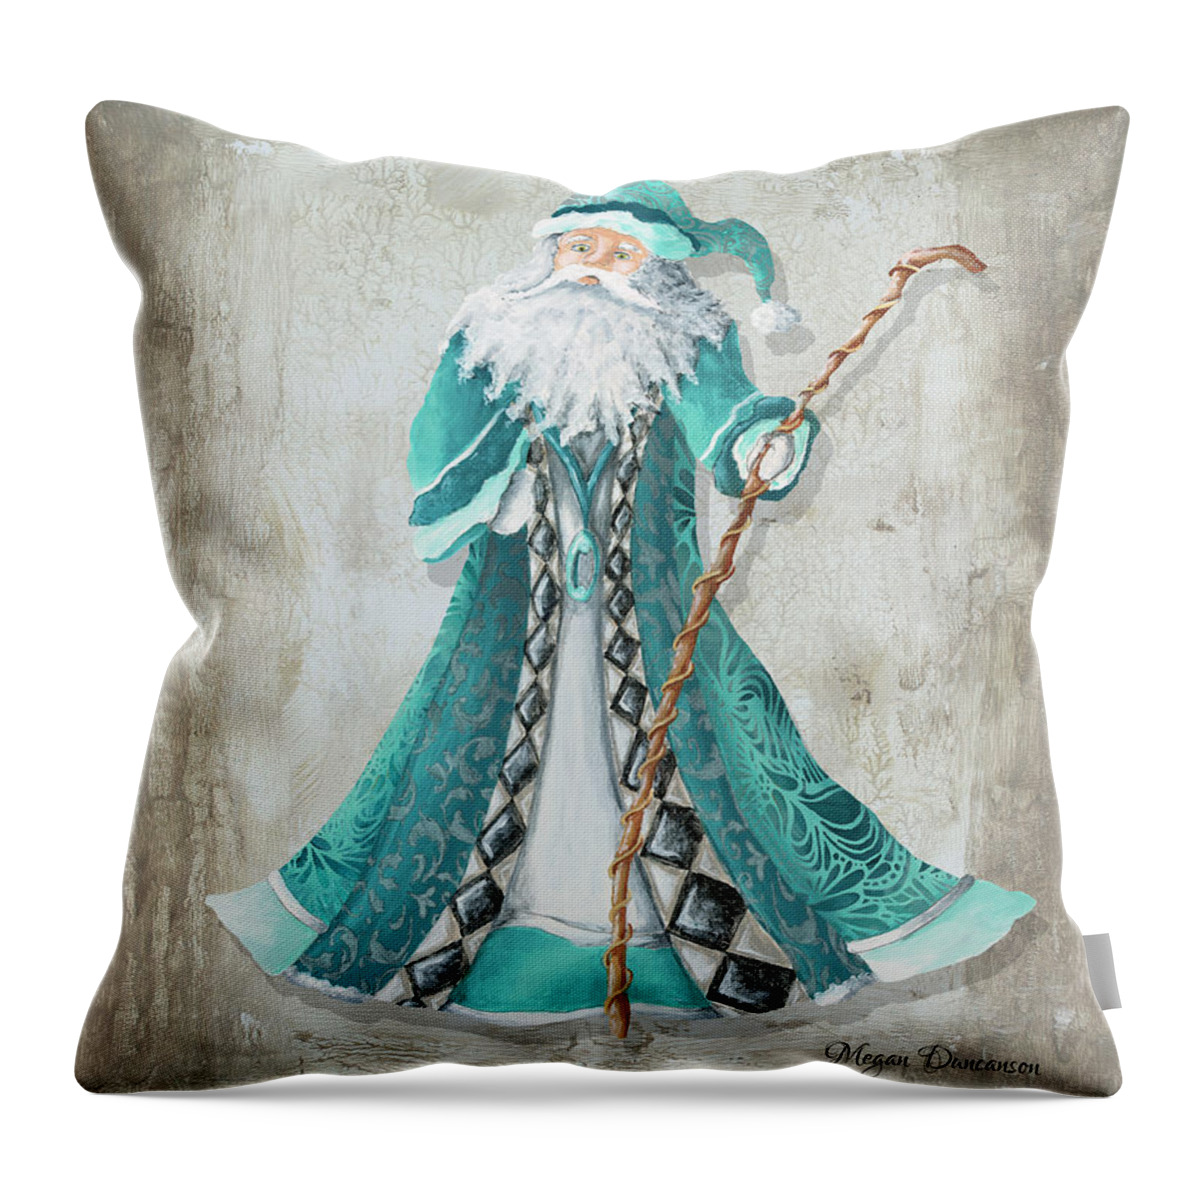 Santa Throw Pillow featuring the painting Old World Style Turquoise Aqua Teal Santa Claus Christmas Art by Megan Duncanson by Megan Duncanson